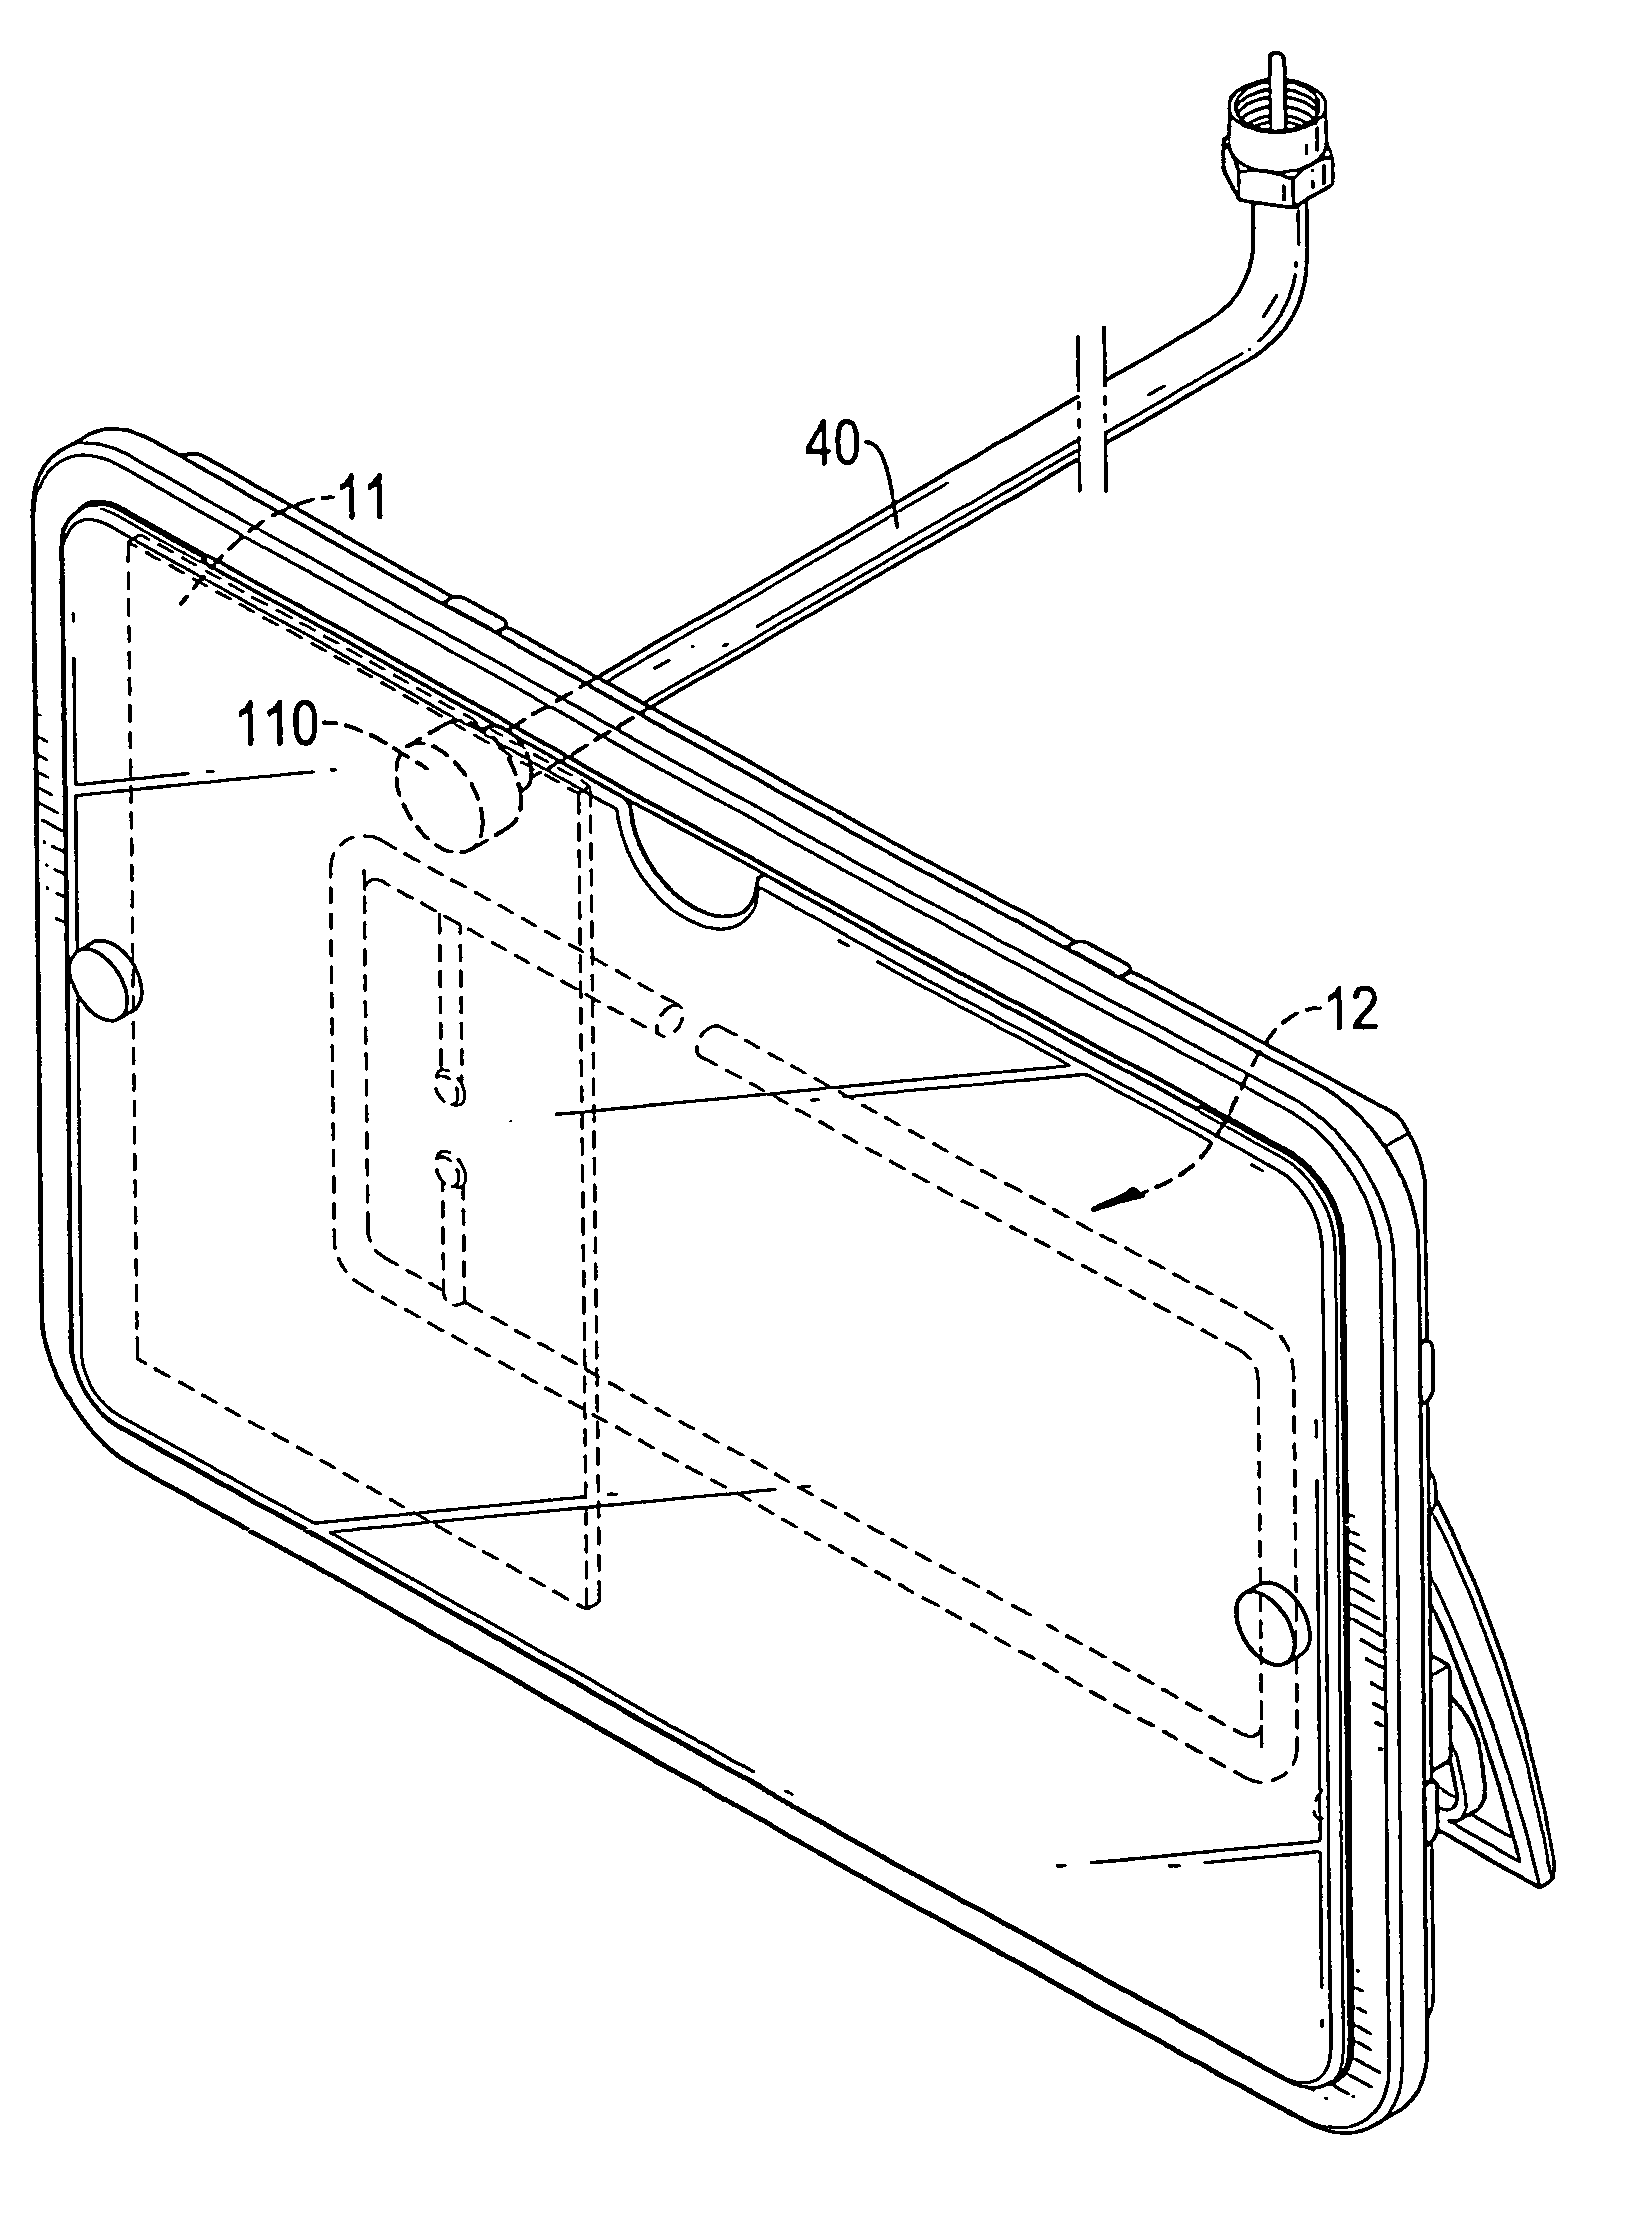 Flat indoor UHF antenna device for a digital television